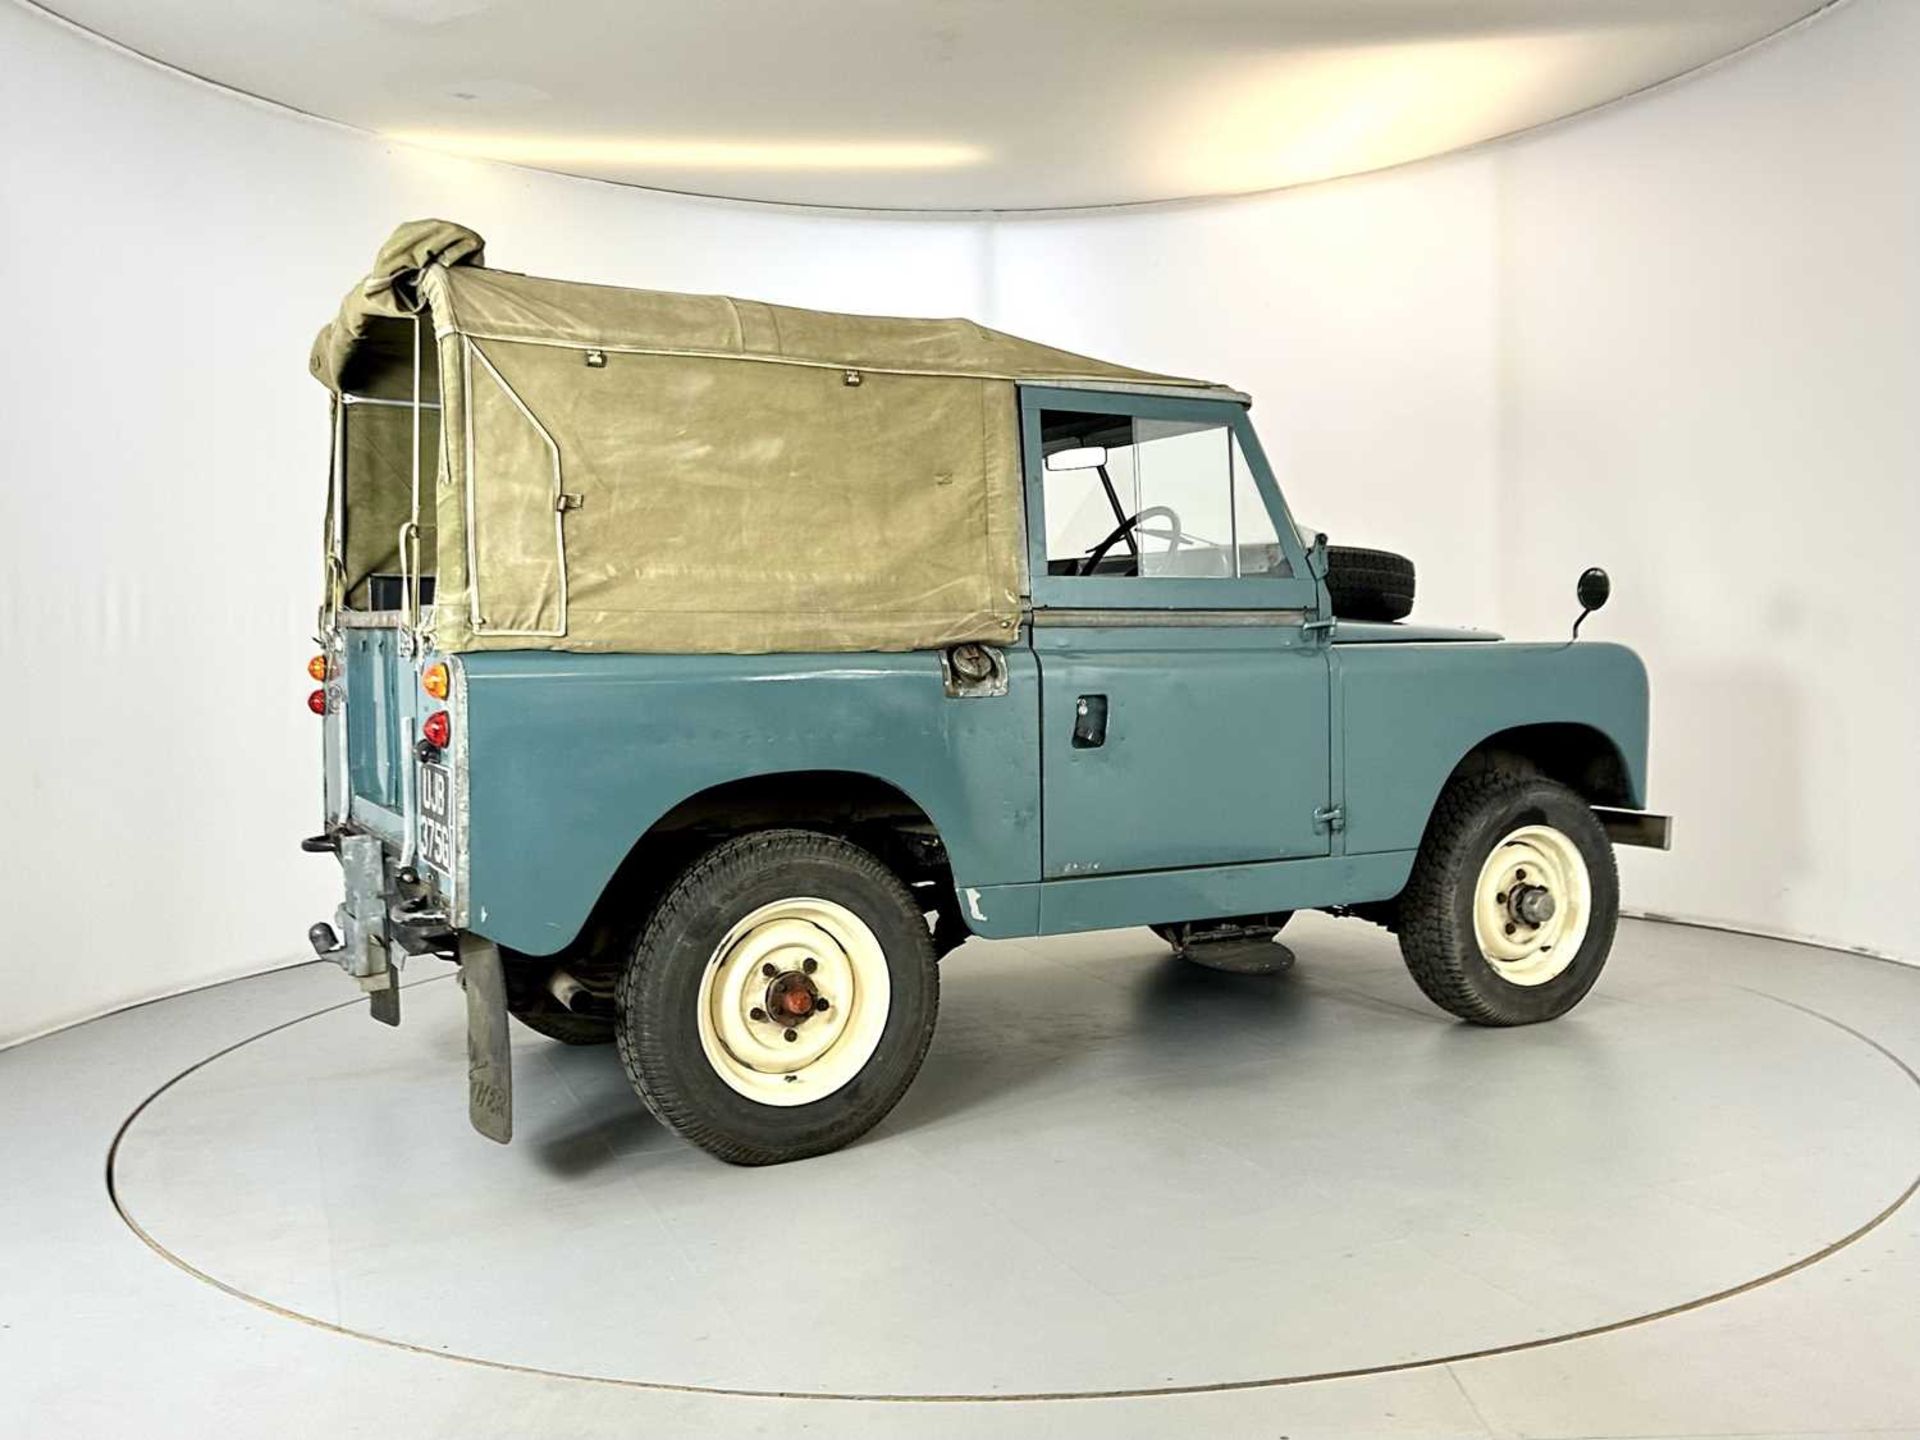 1969 Land Rover Series 2A Professional V6 engine conversion - Image 10 of 27